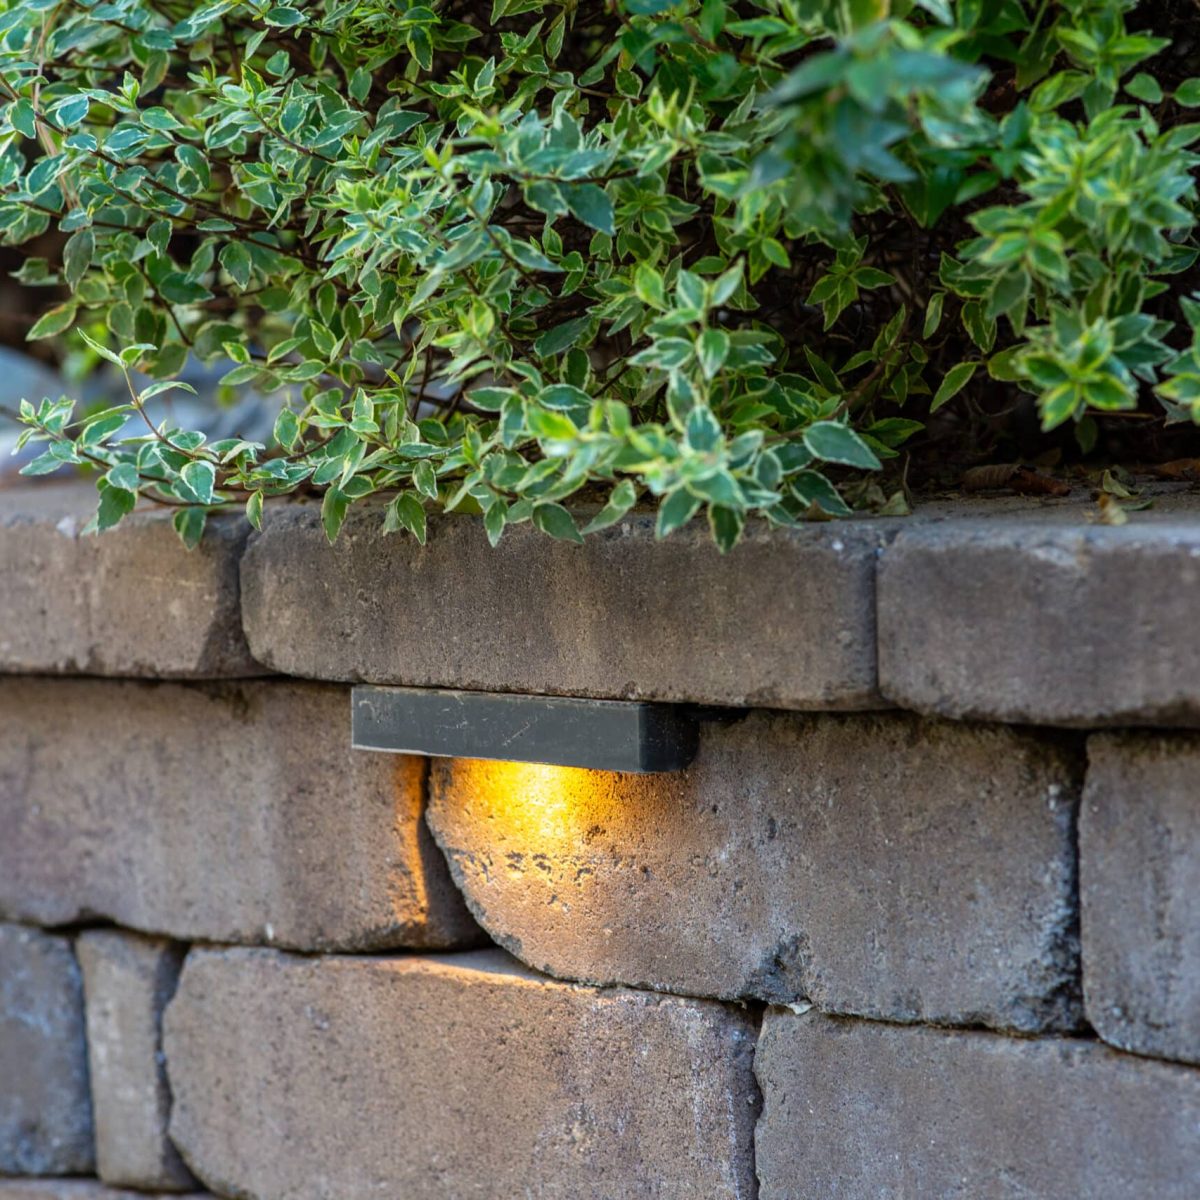 A stone wall with a light on it.